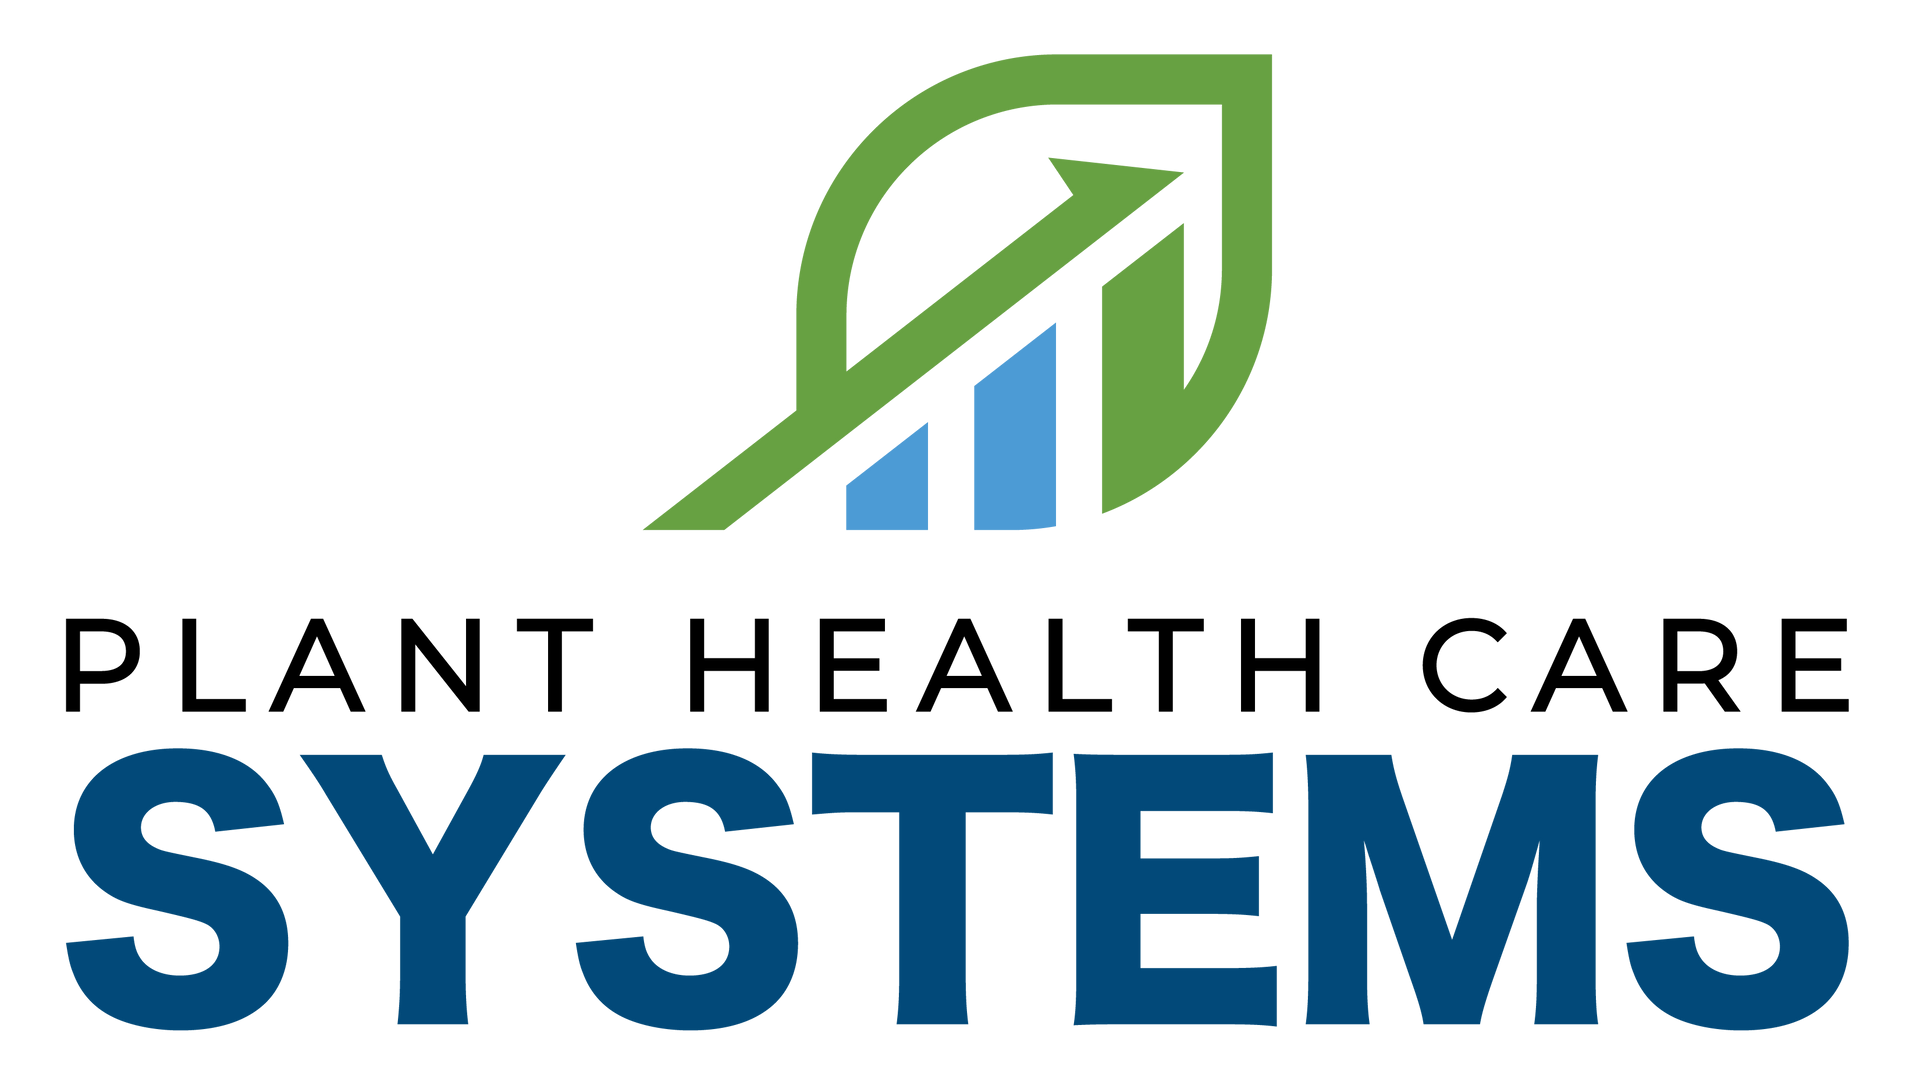 A logo for plant health care systems with a green leaf and an arrow.